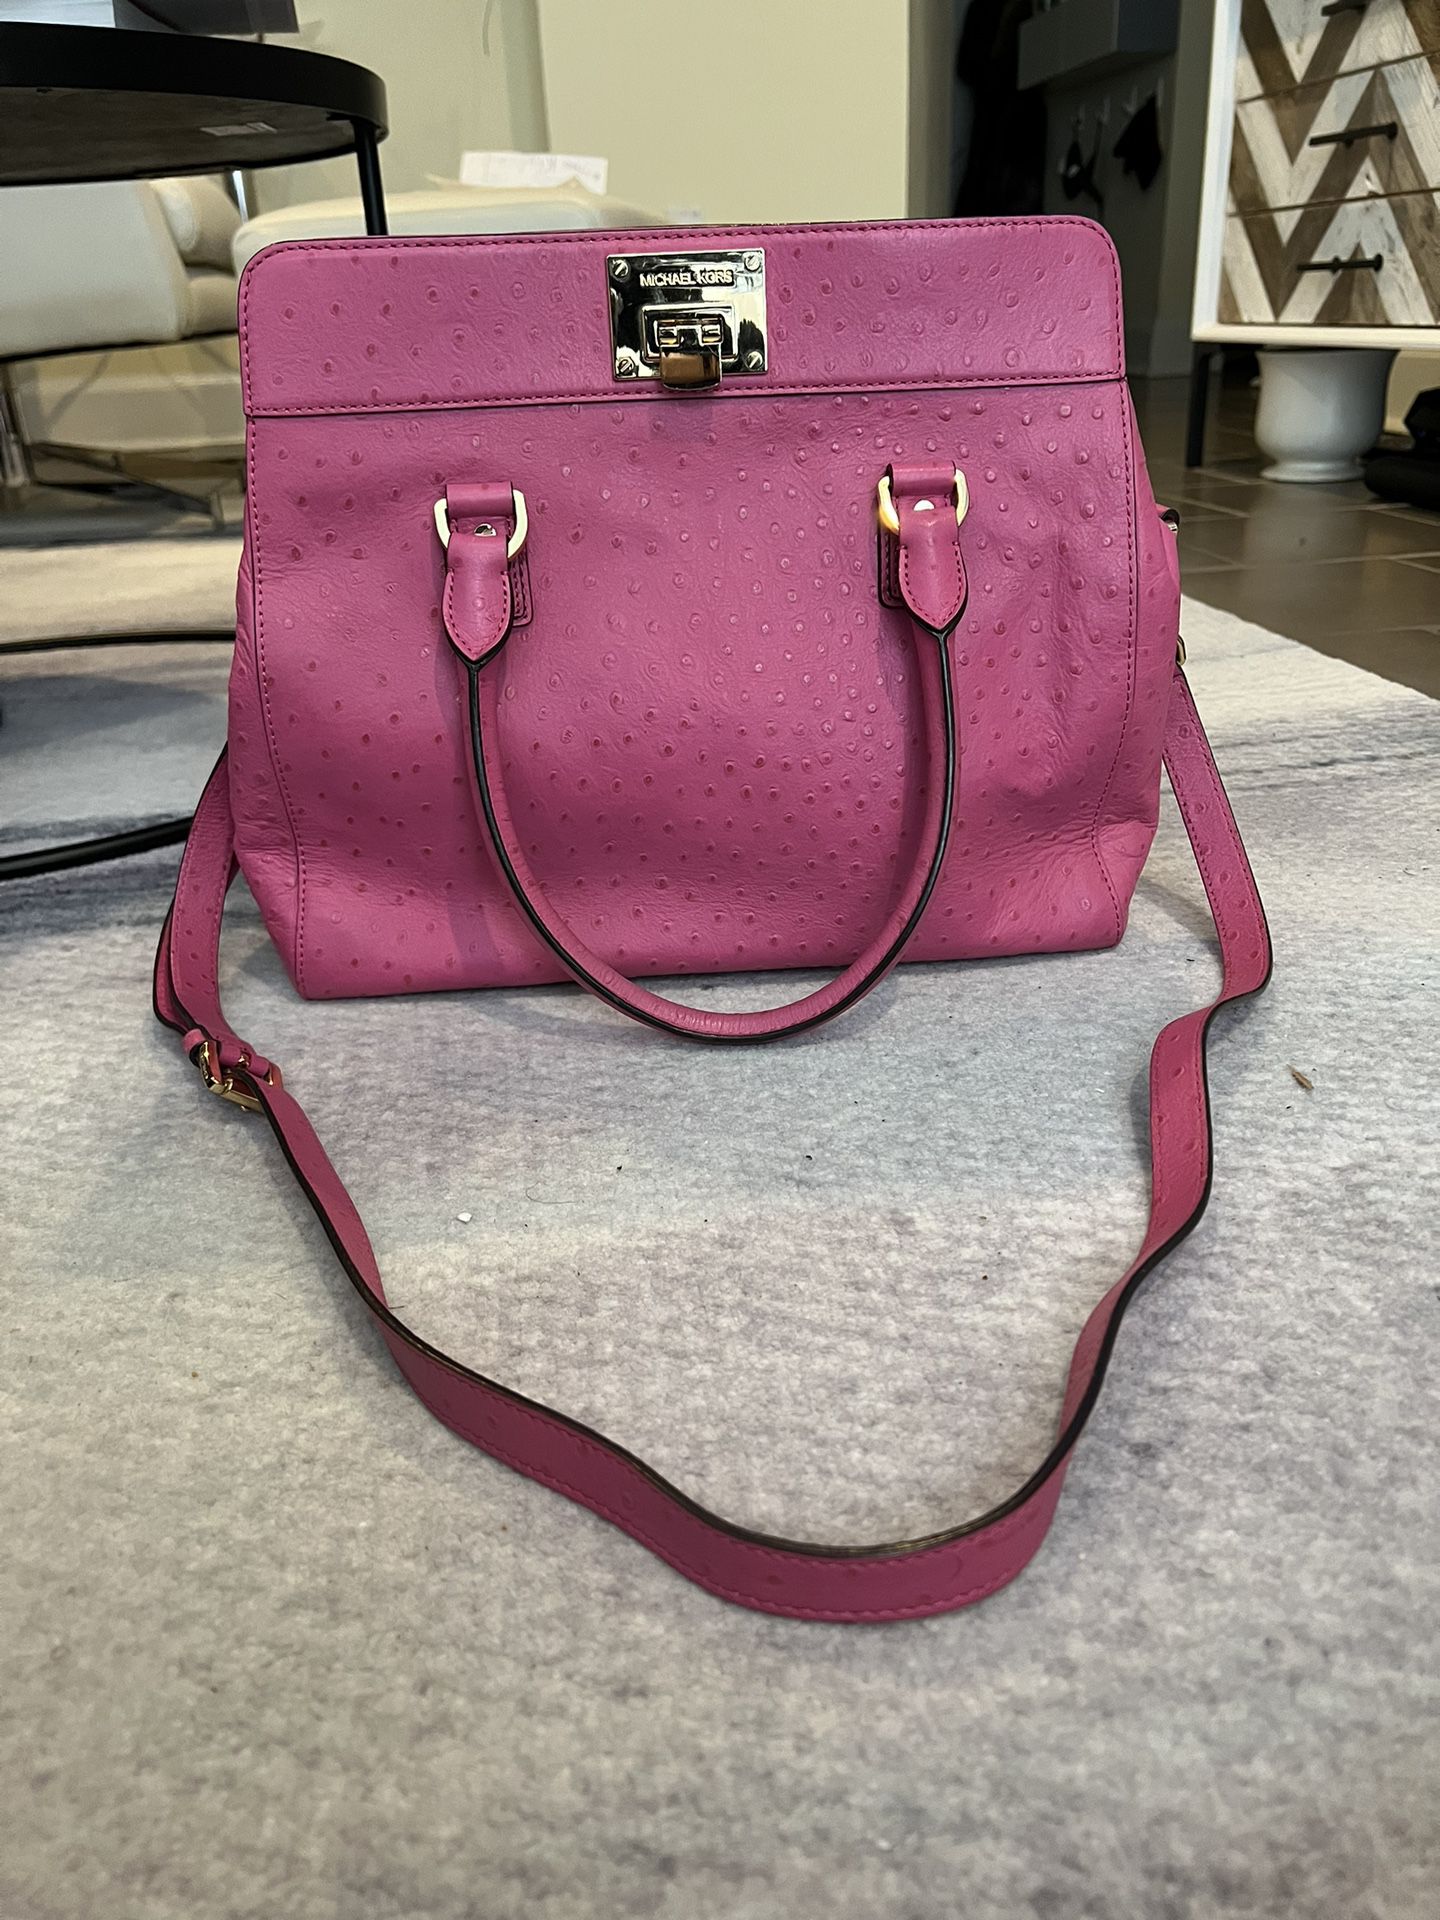 Pink Ostrich Skin Purse for Sale in Ft Sm Houston, TX - OfferUp